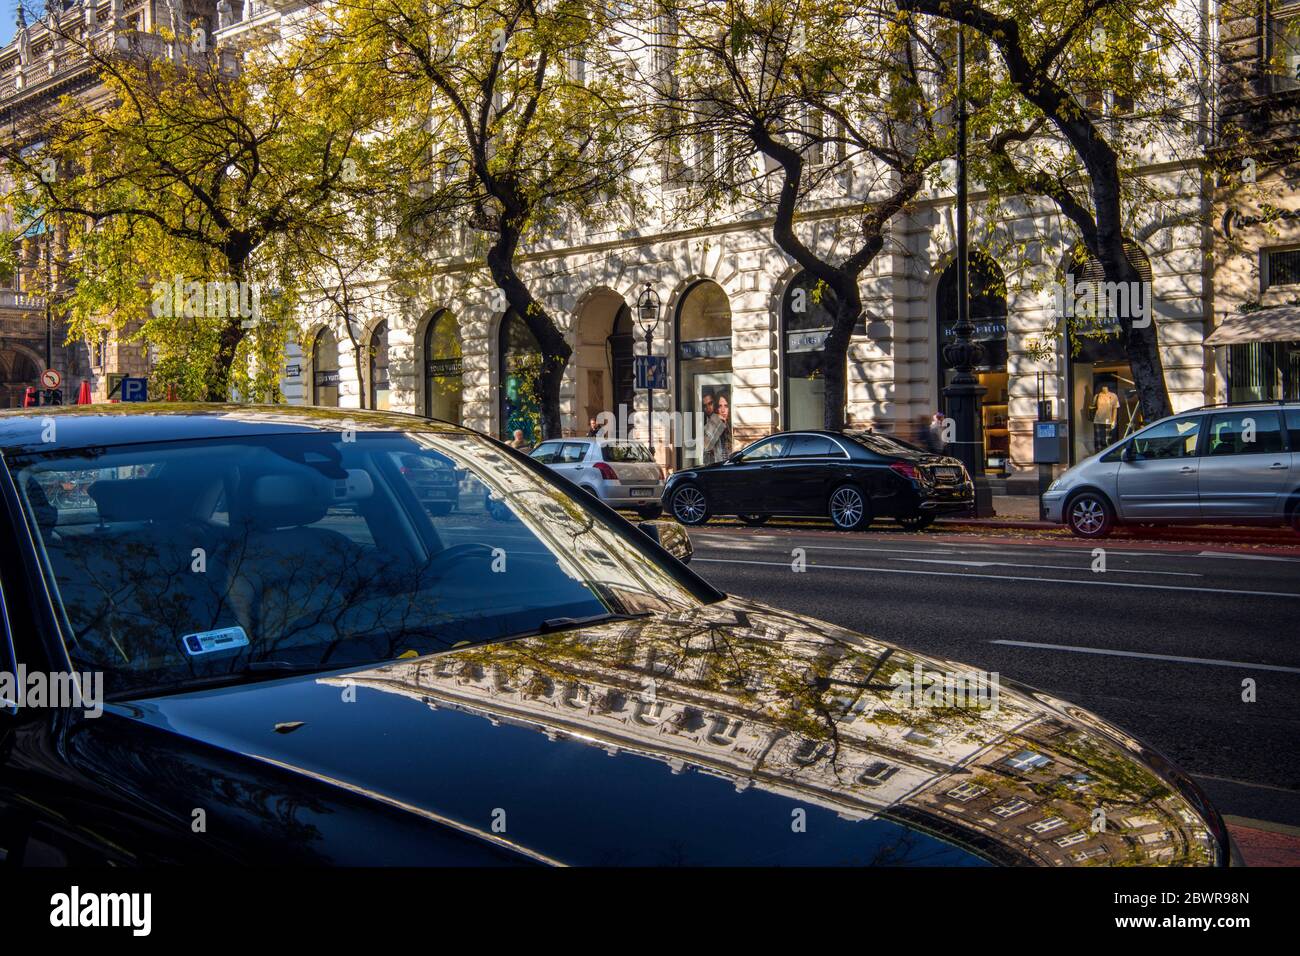 Downtown Budapest (Pest)- Andrassy Ut boulevard with trees reflecting in parked cars, Budapest, Central Hungary, Hungary. Stock Photo